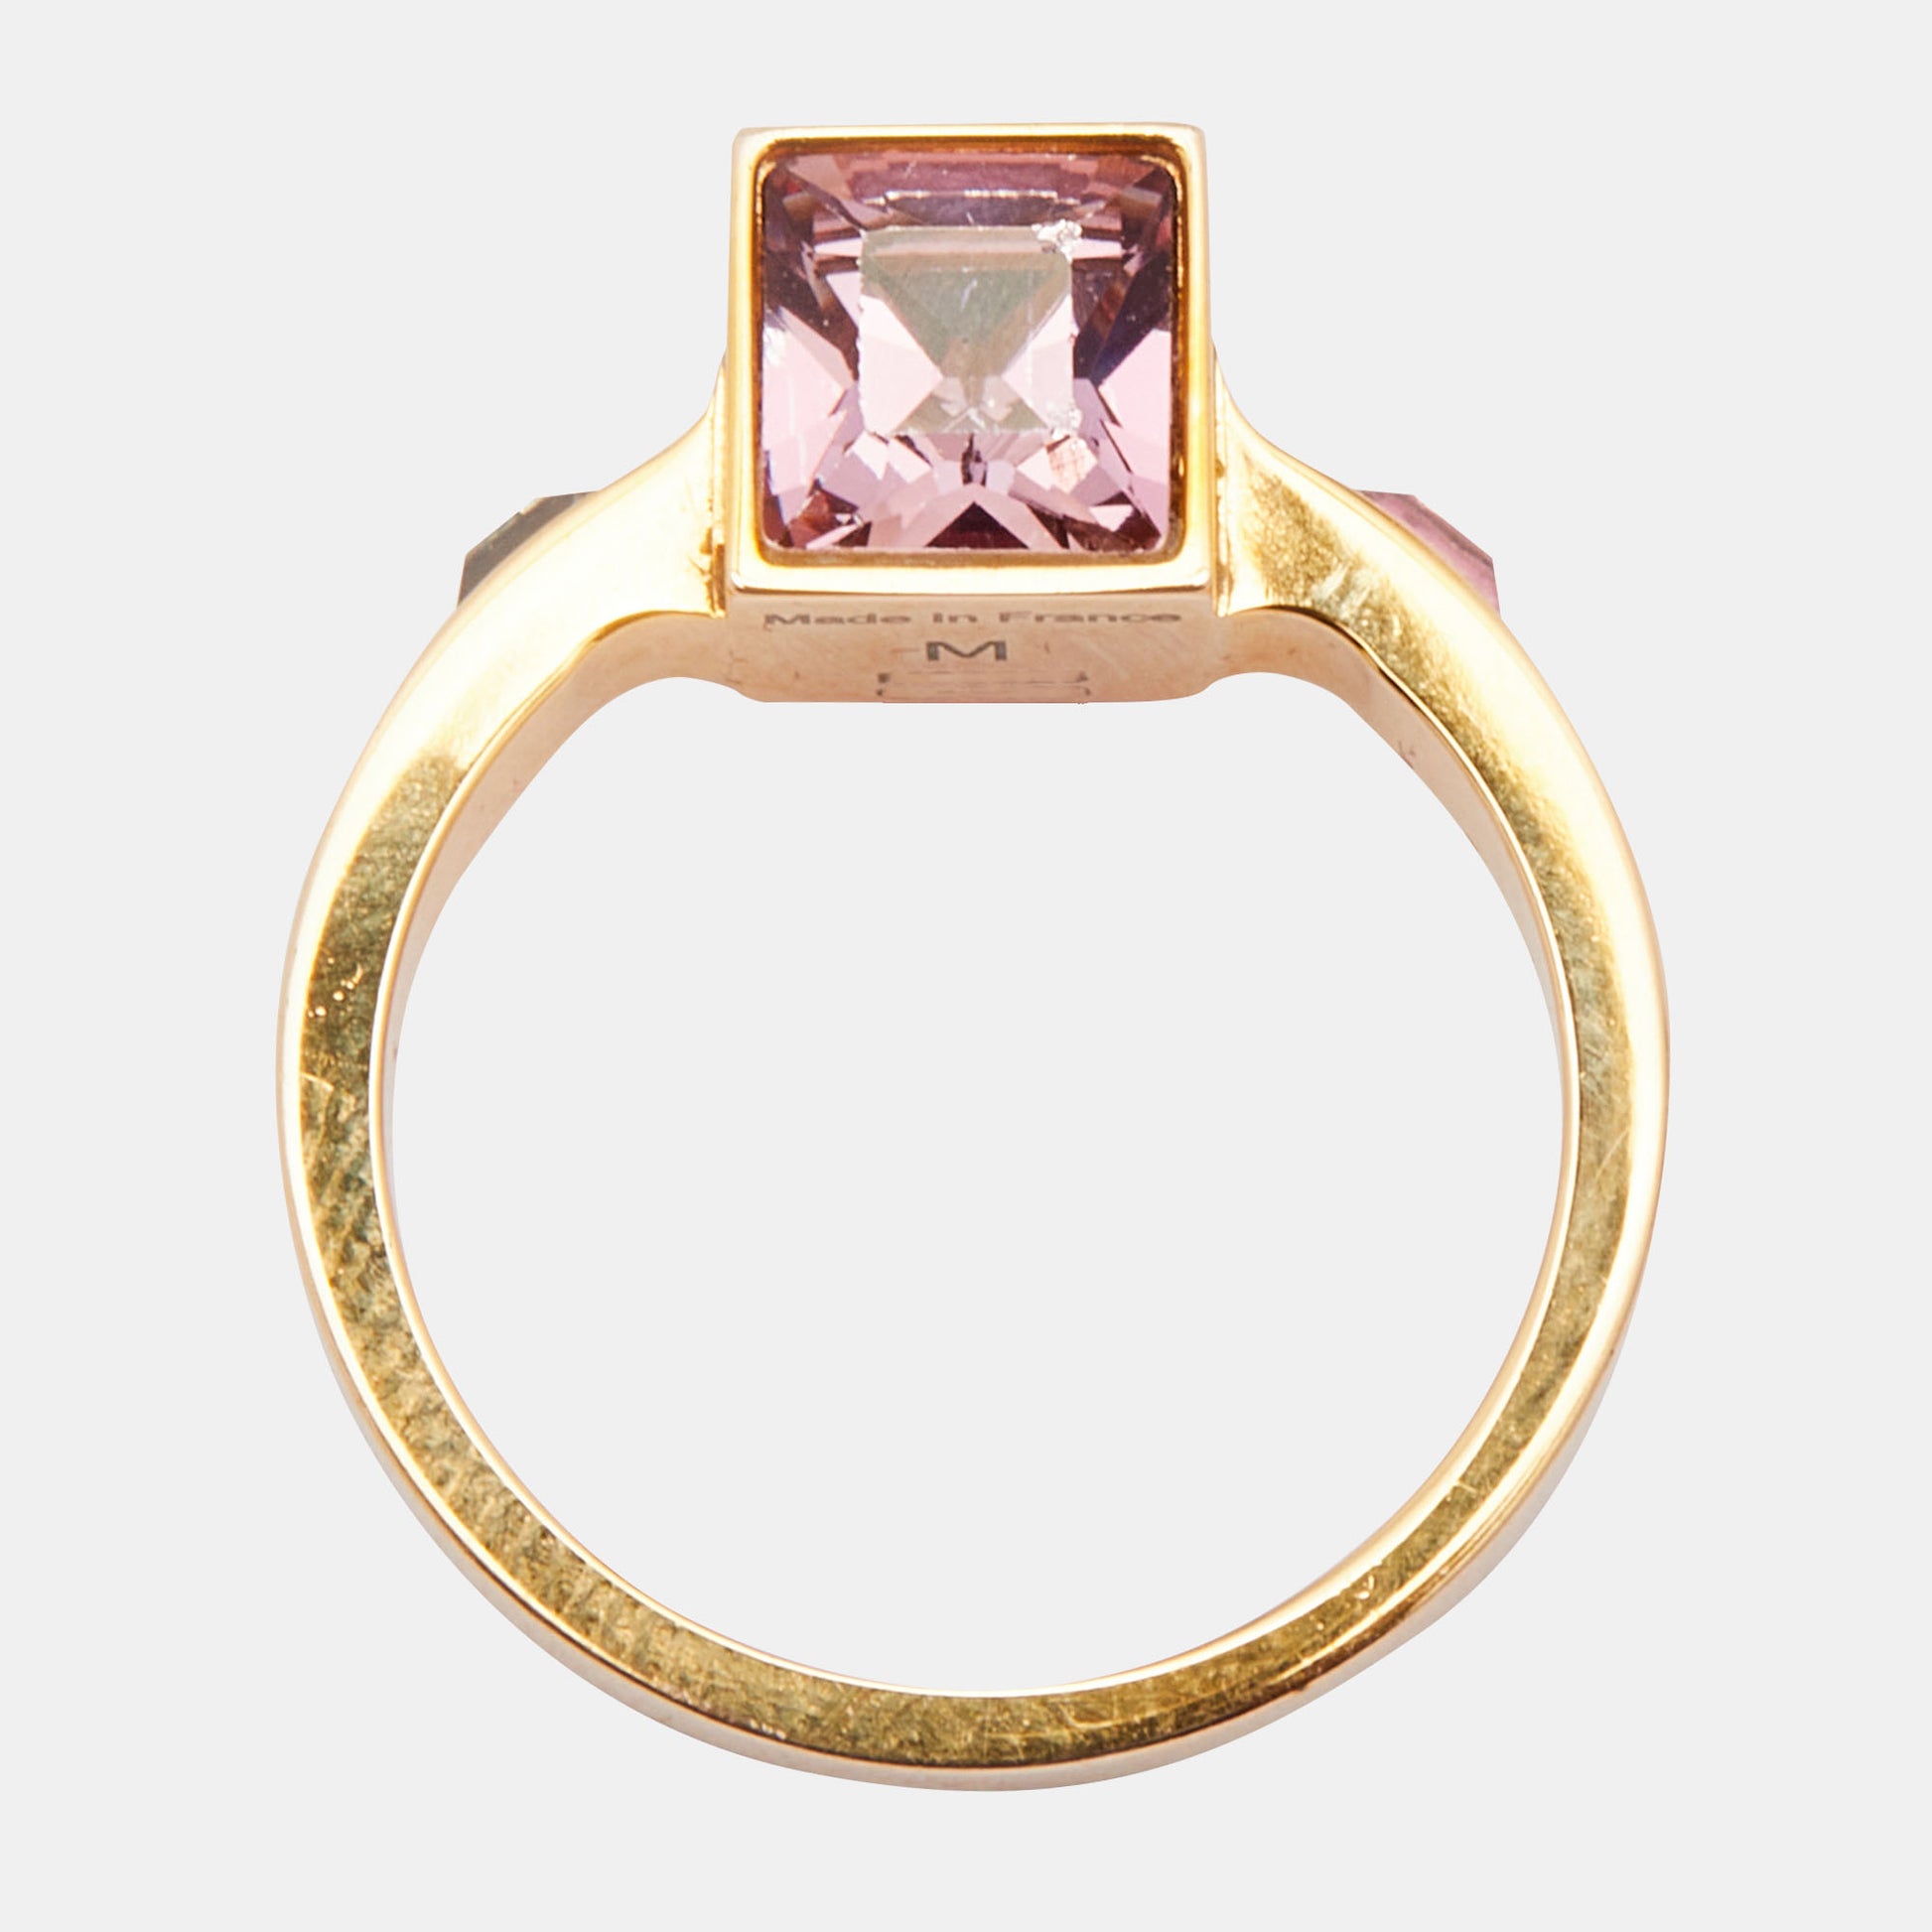 LOUIS VUITTON Gamble Ring Size S Gold-Plated Pink Color Stone M66824  62YA765